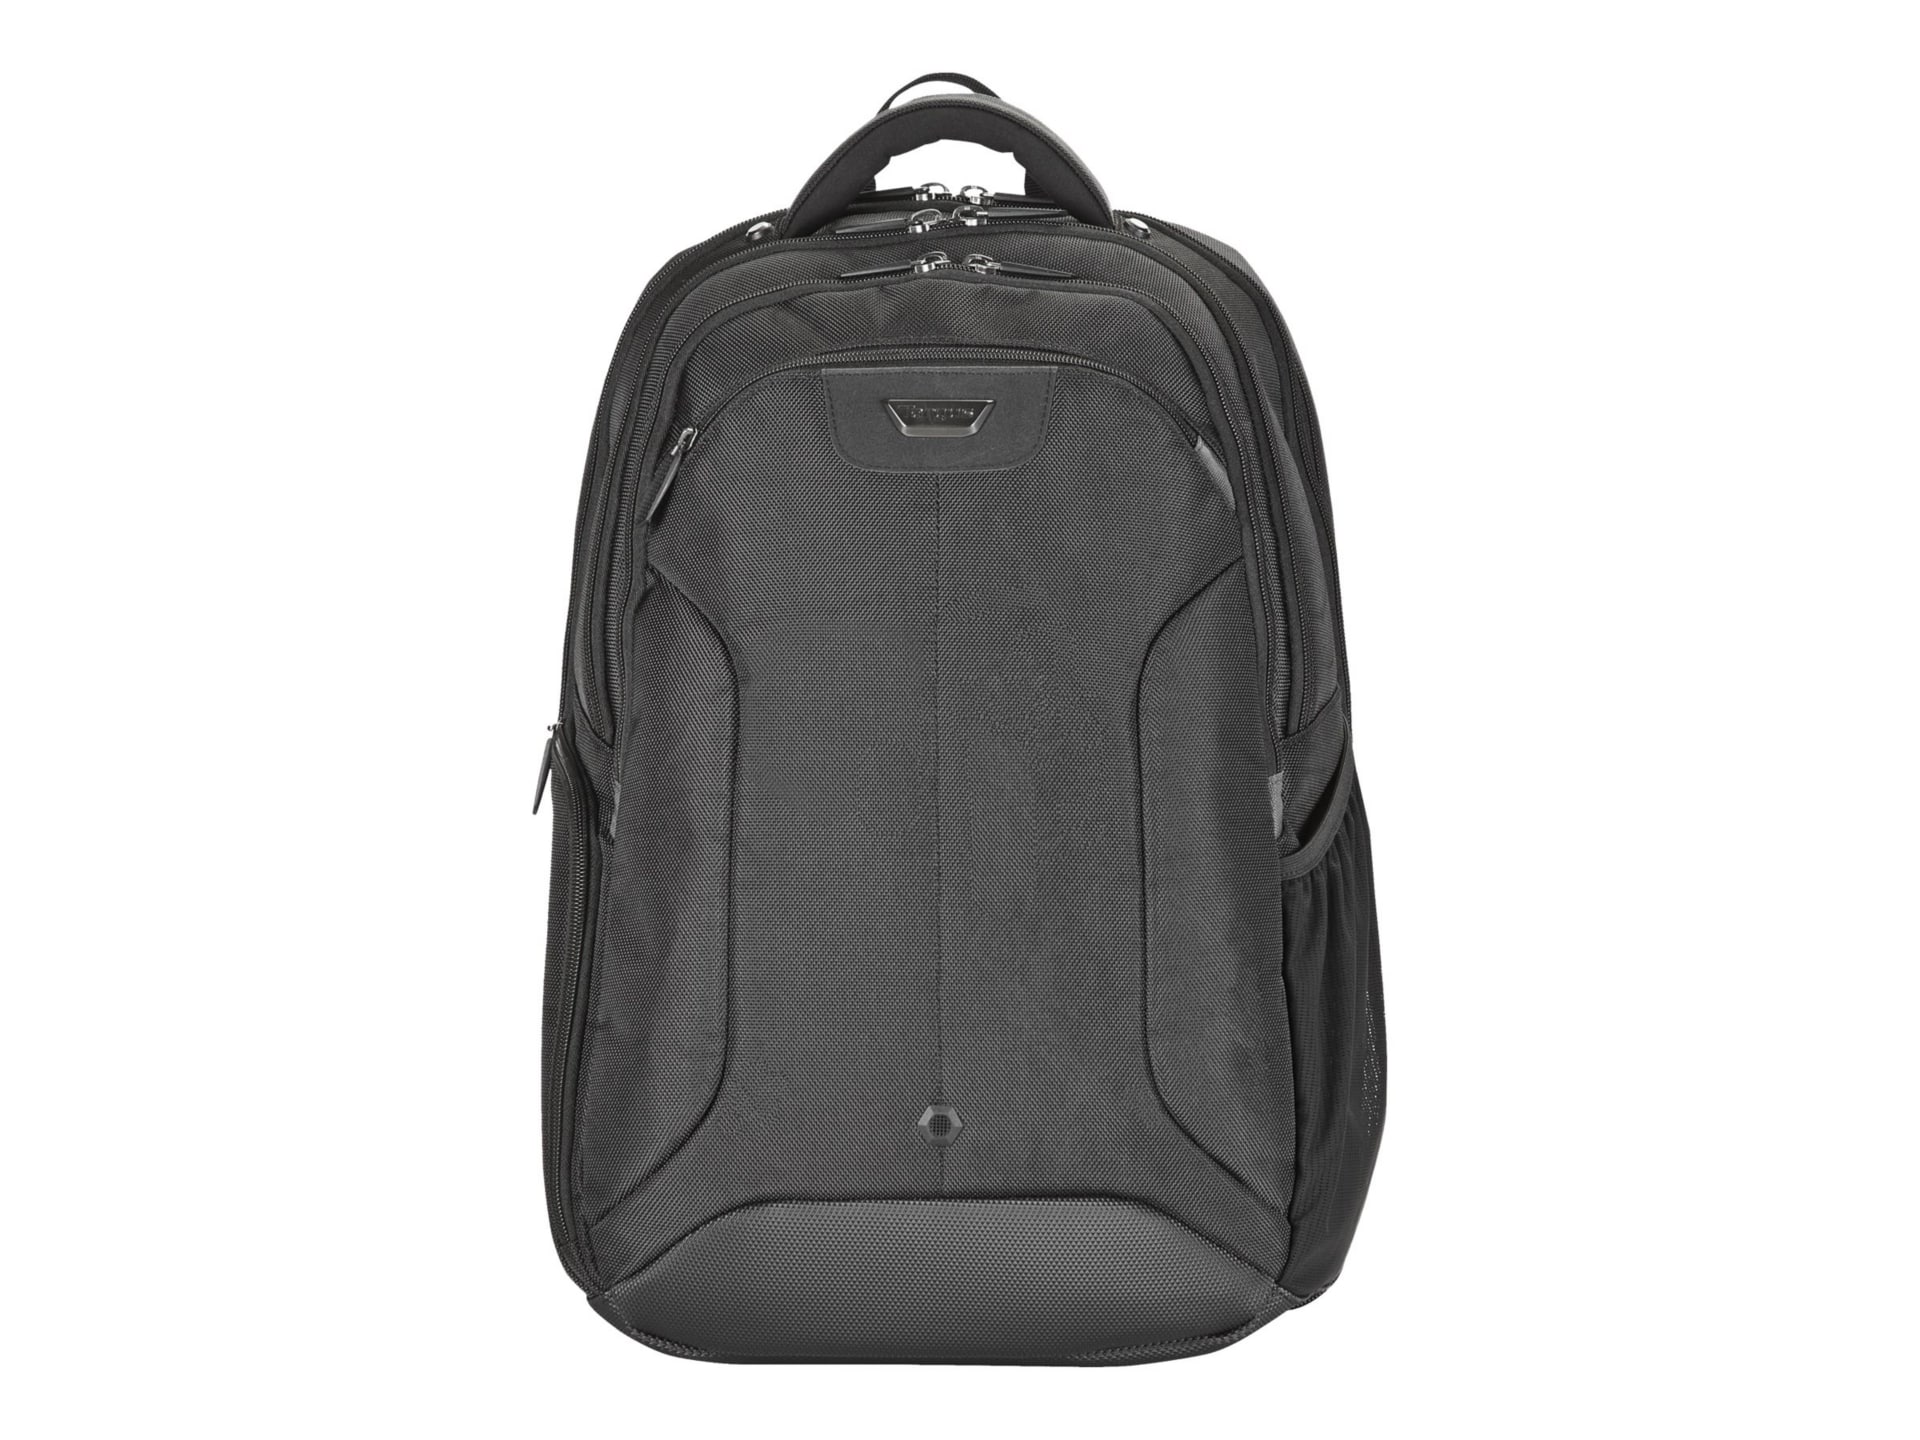 Targus Corporate Traveler CUCT02B Carrying Case (Backpack) for 10.5" to 15.